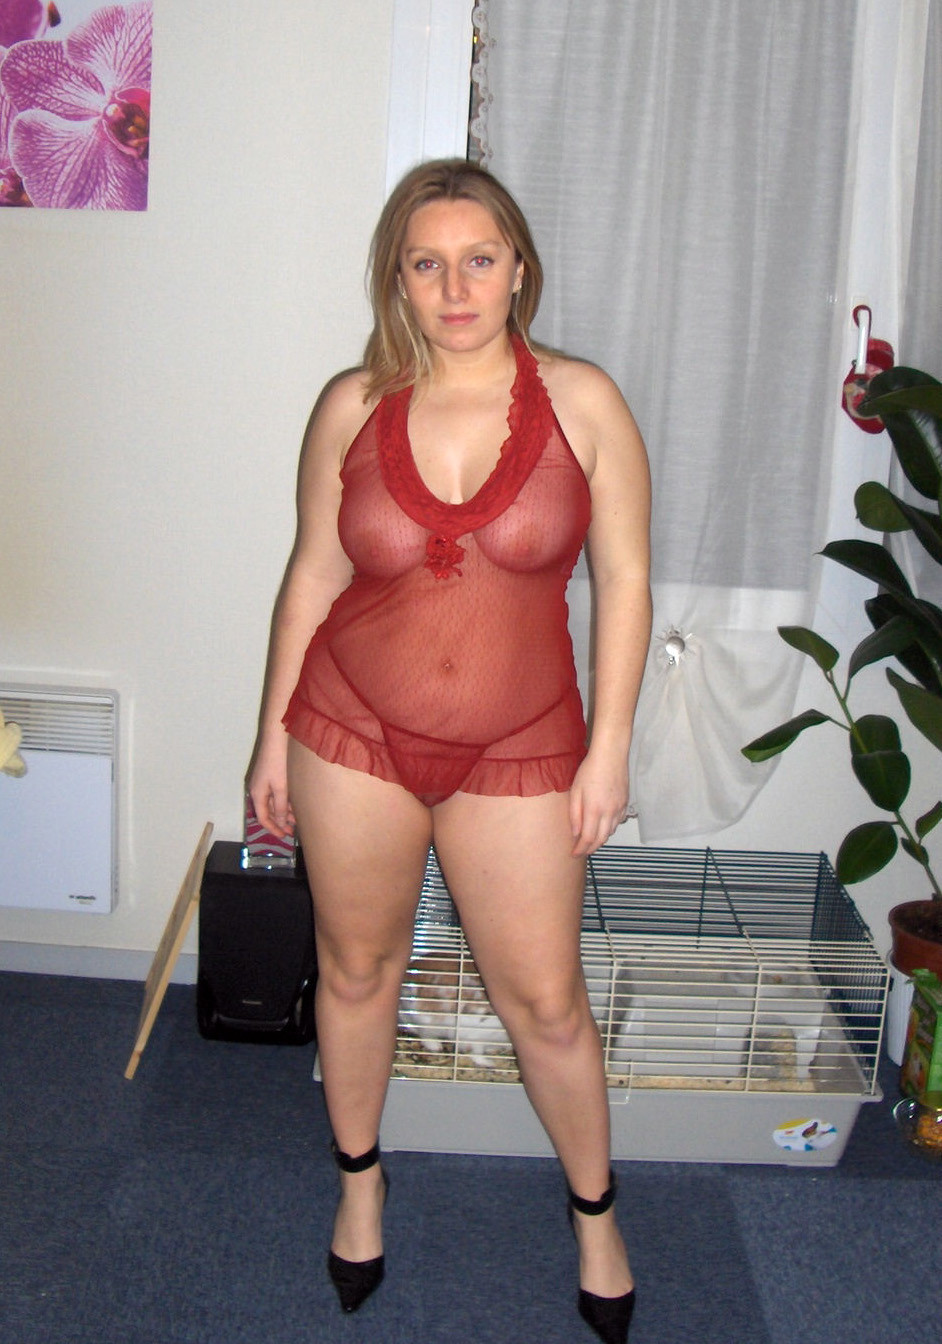 Chubby naked in her room